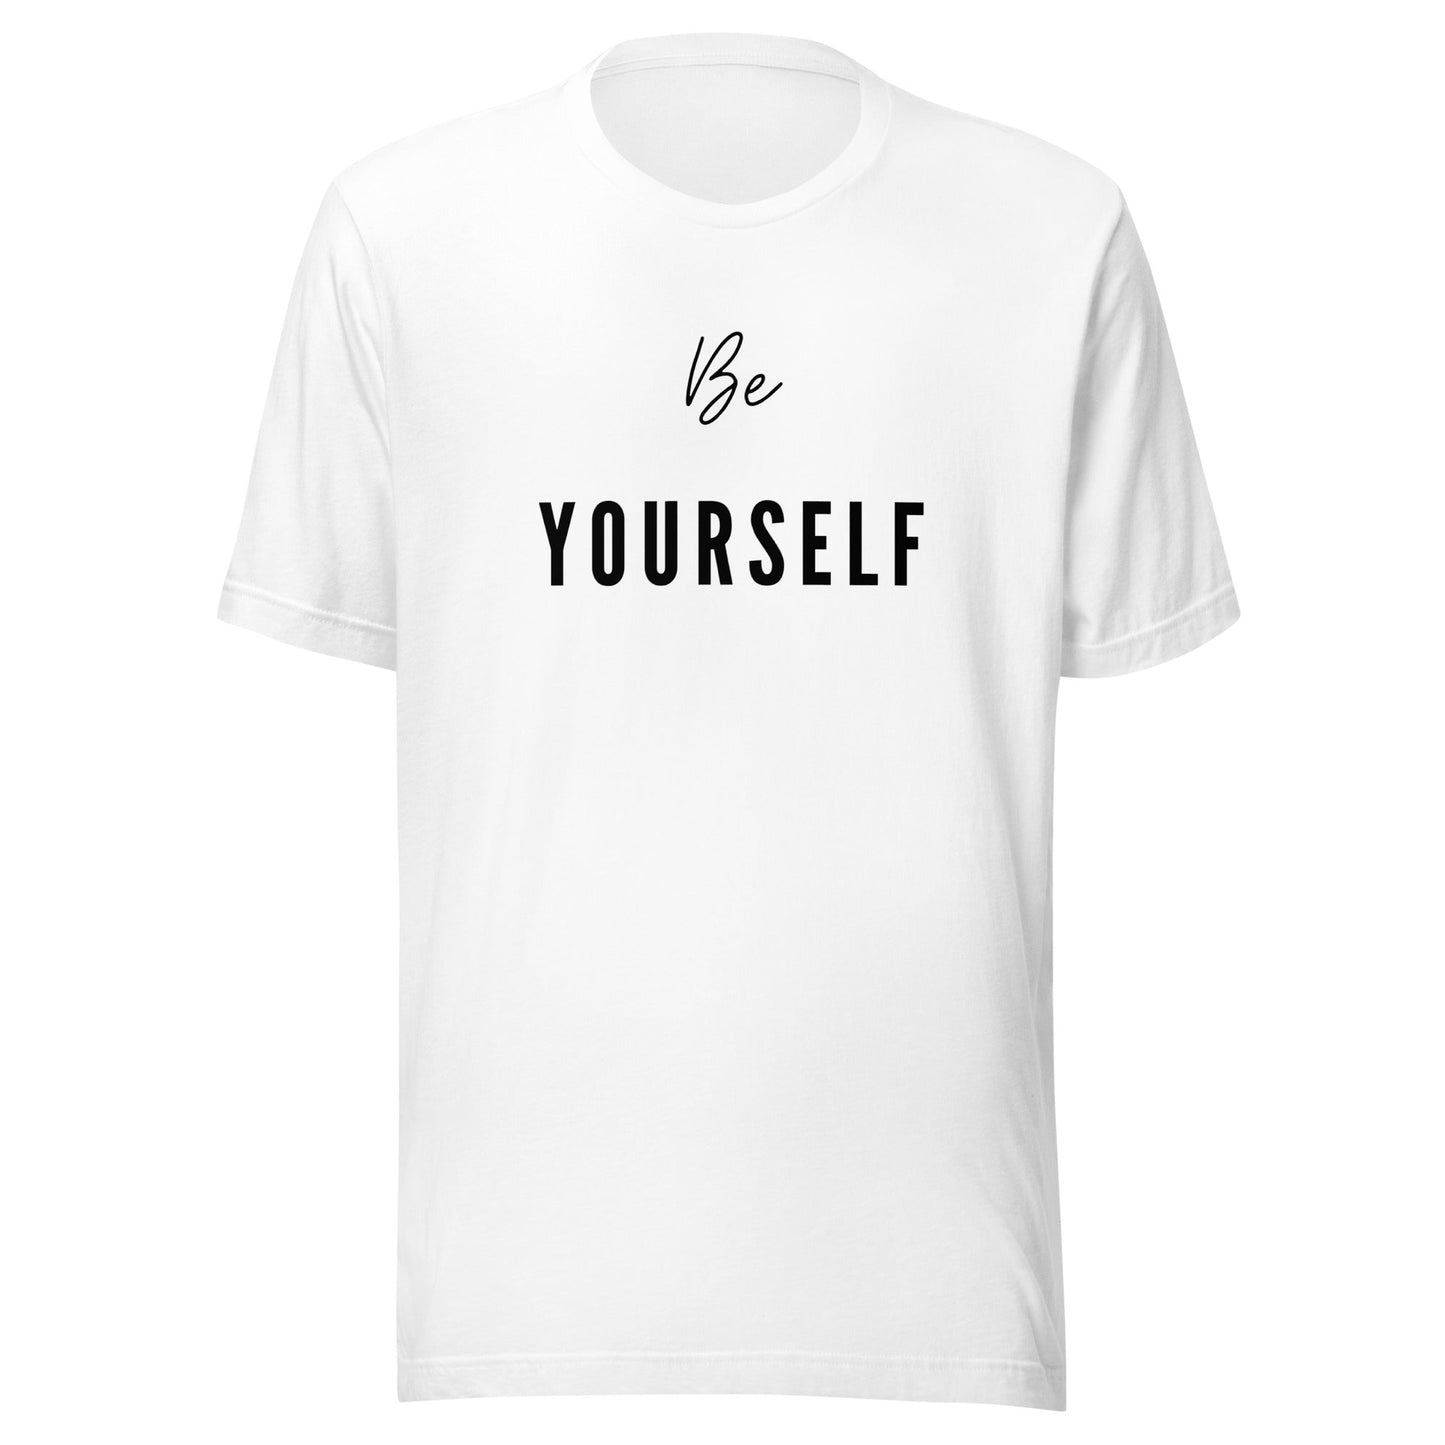 Be Yourself - Unisex t-shirt - lilaloop - T-shirt